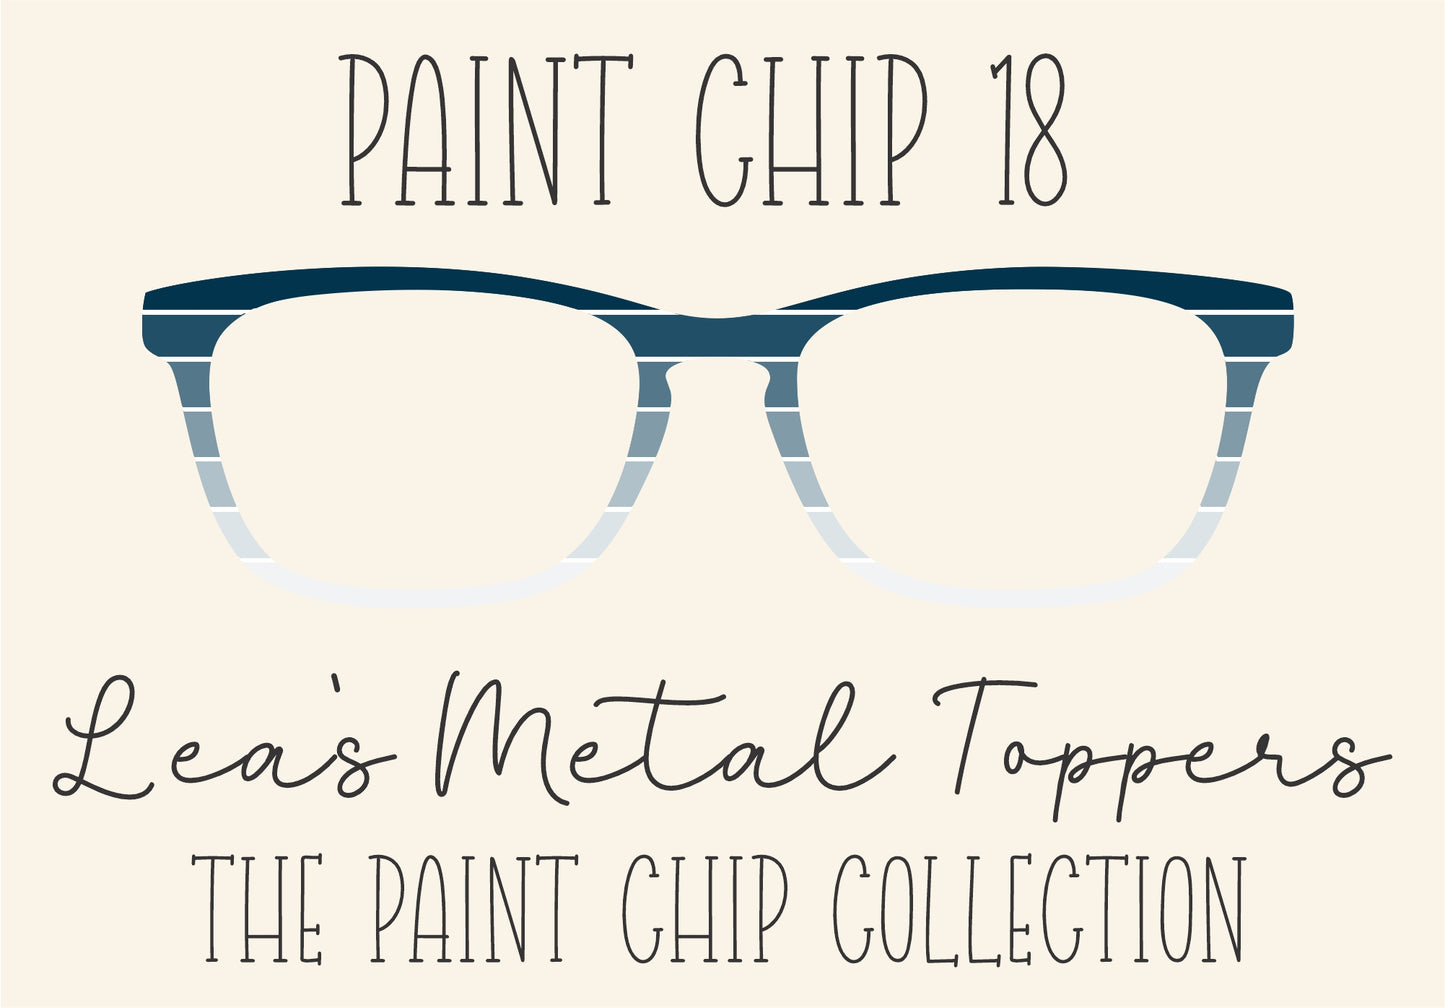 PAINT CHIP 18 Eyewear Frame Toppers COMES WITH MAGNETS